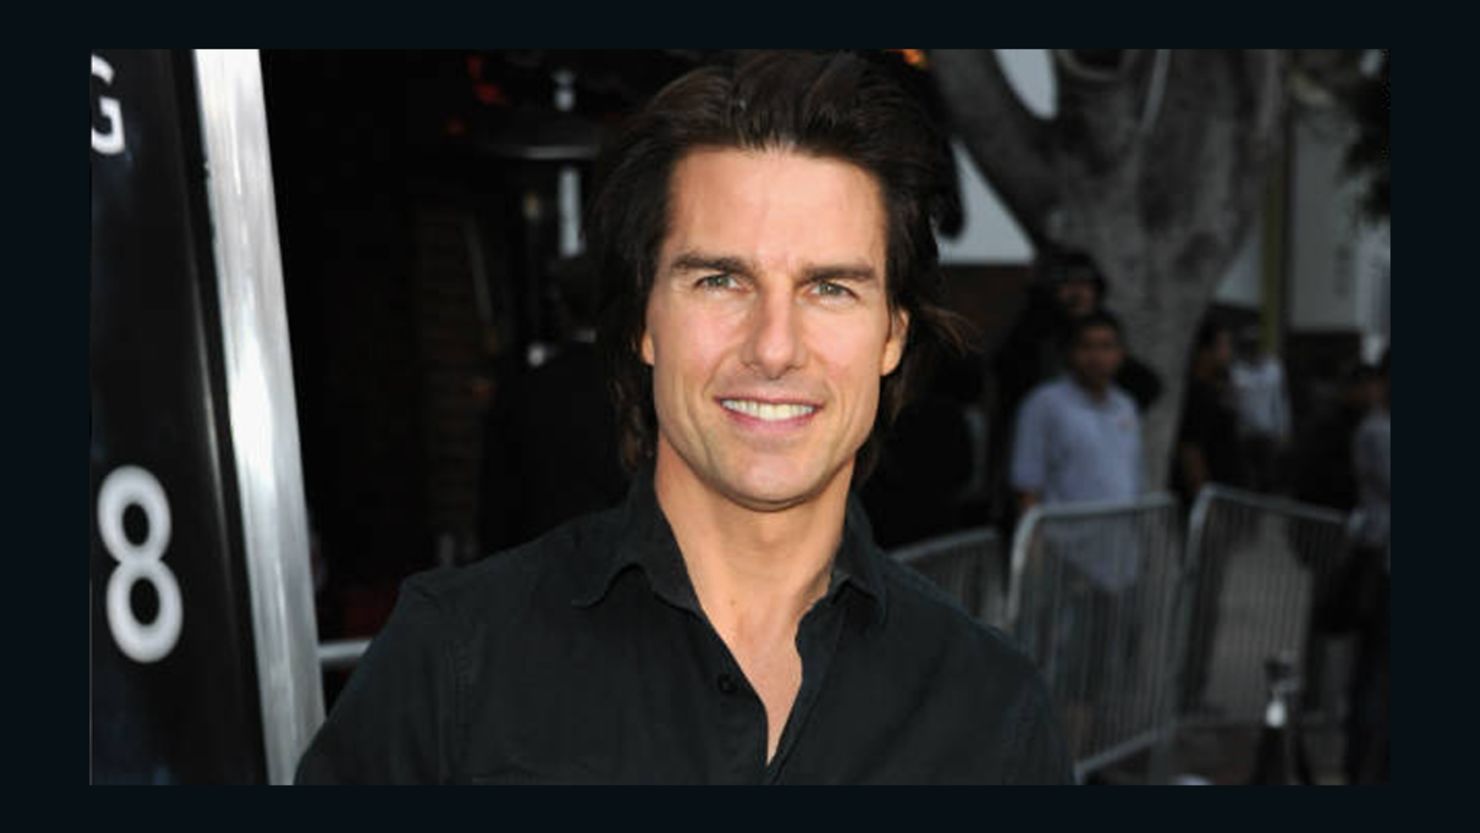 Tom Cruise was not home during the alleged incident.